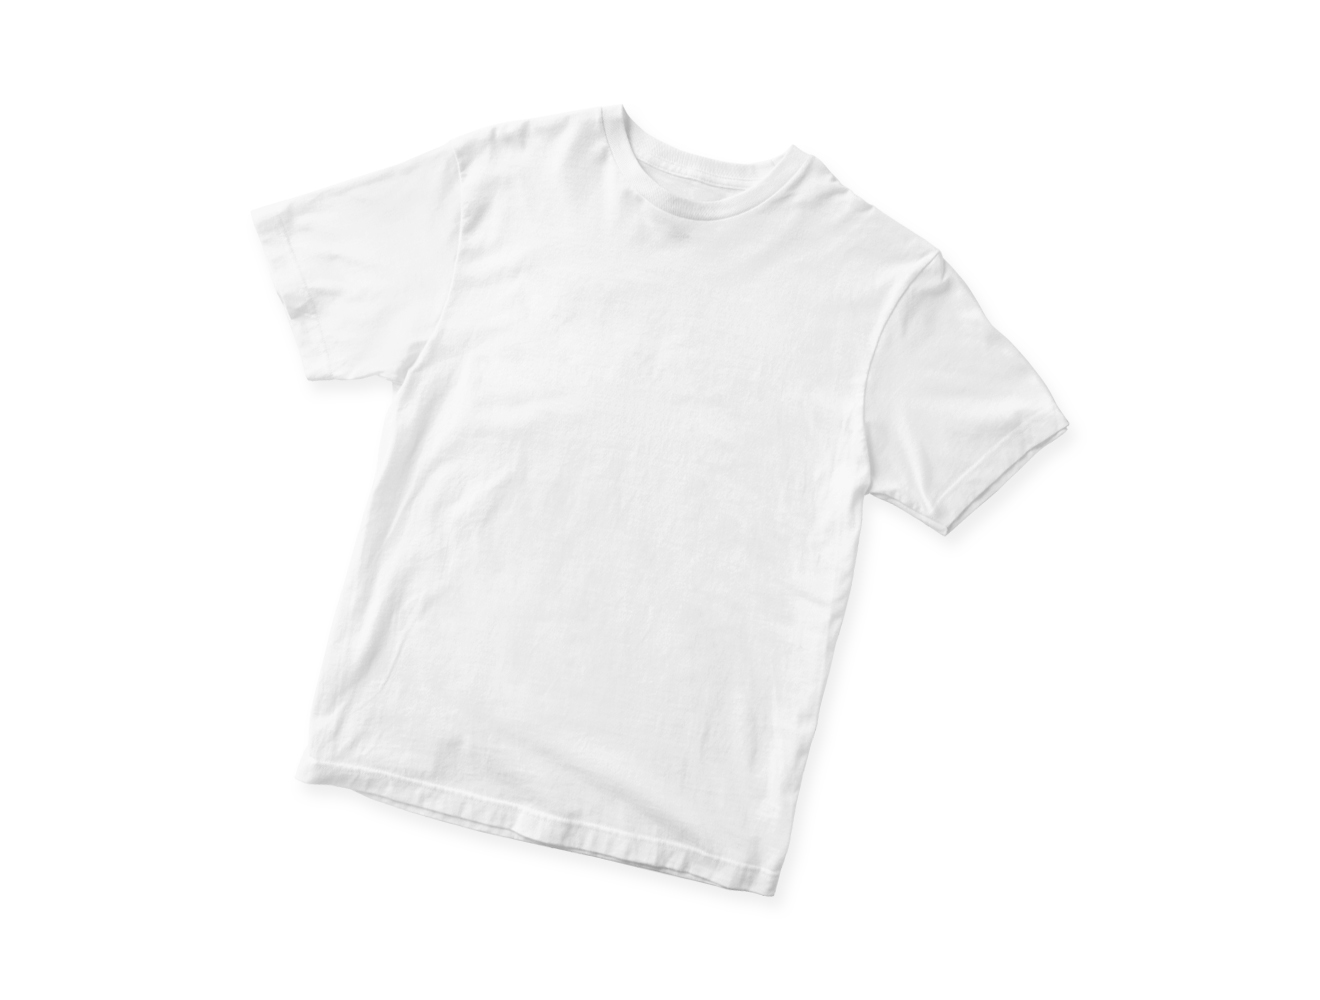 Sublimation T-Shirt for Adults size XL - White